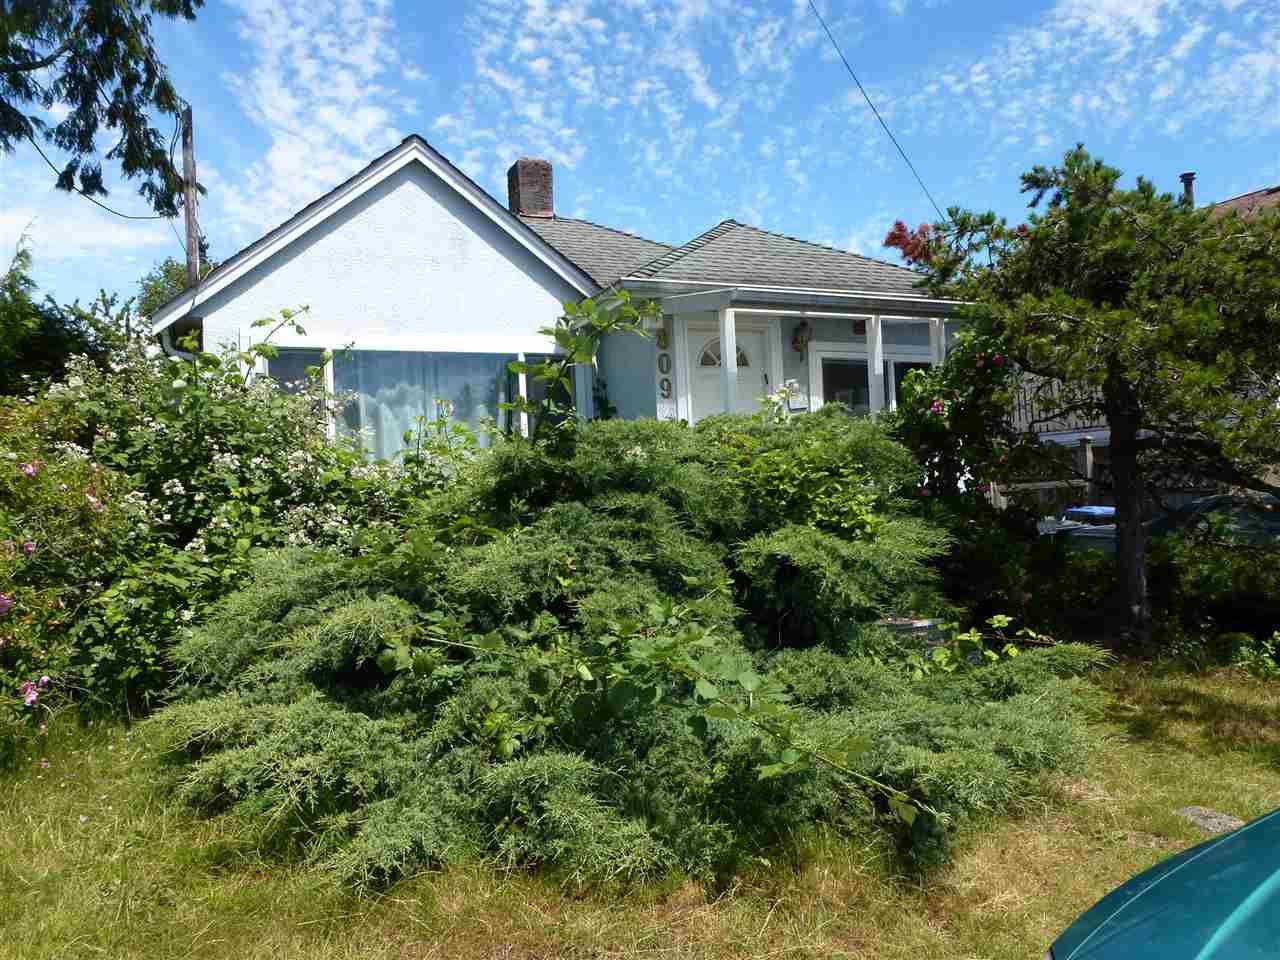 Main Photo: 809 TWENTY FIRST Street in New Westminster: Connaught Heights House for sale : MLS®# R2179090